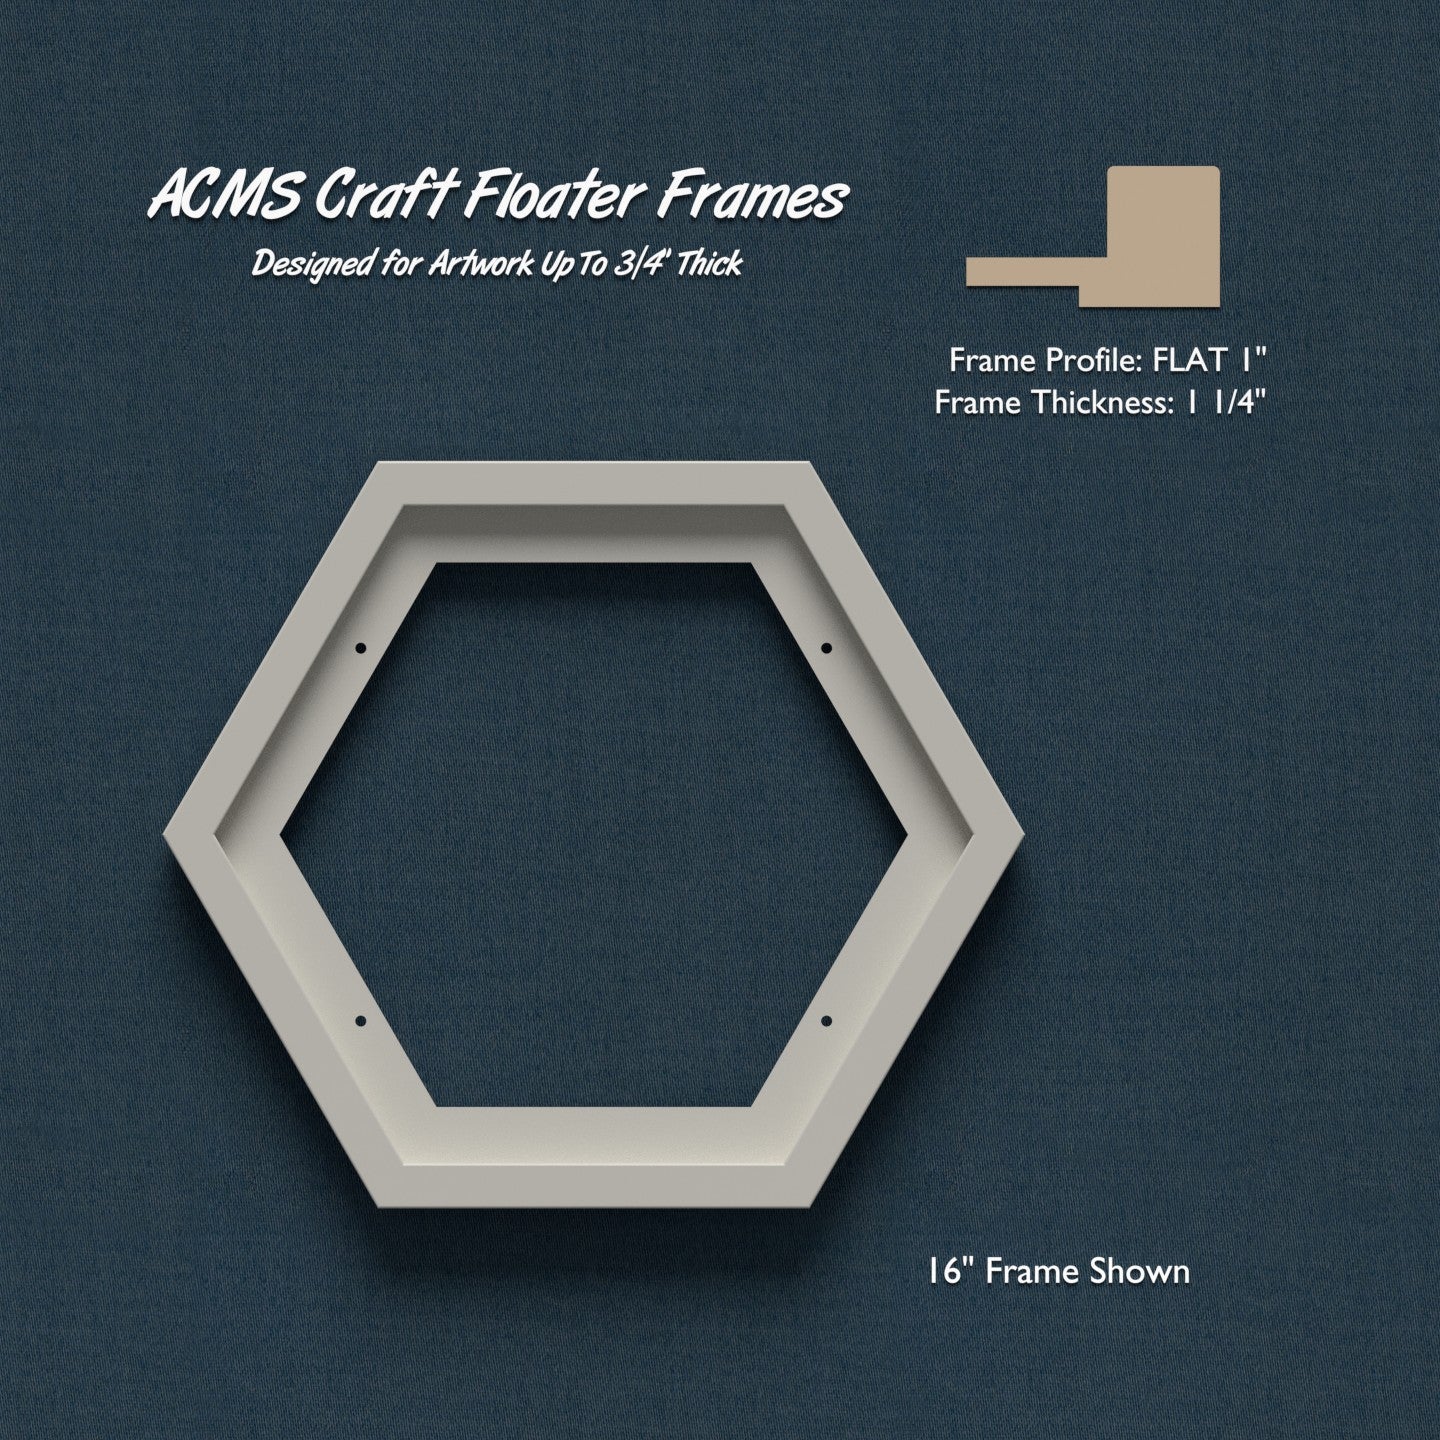 Hexagon Craft Floater Frame - FLAT 1" Profile - 1 1/4" Thick